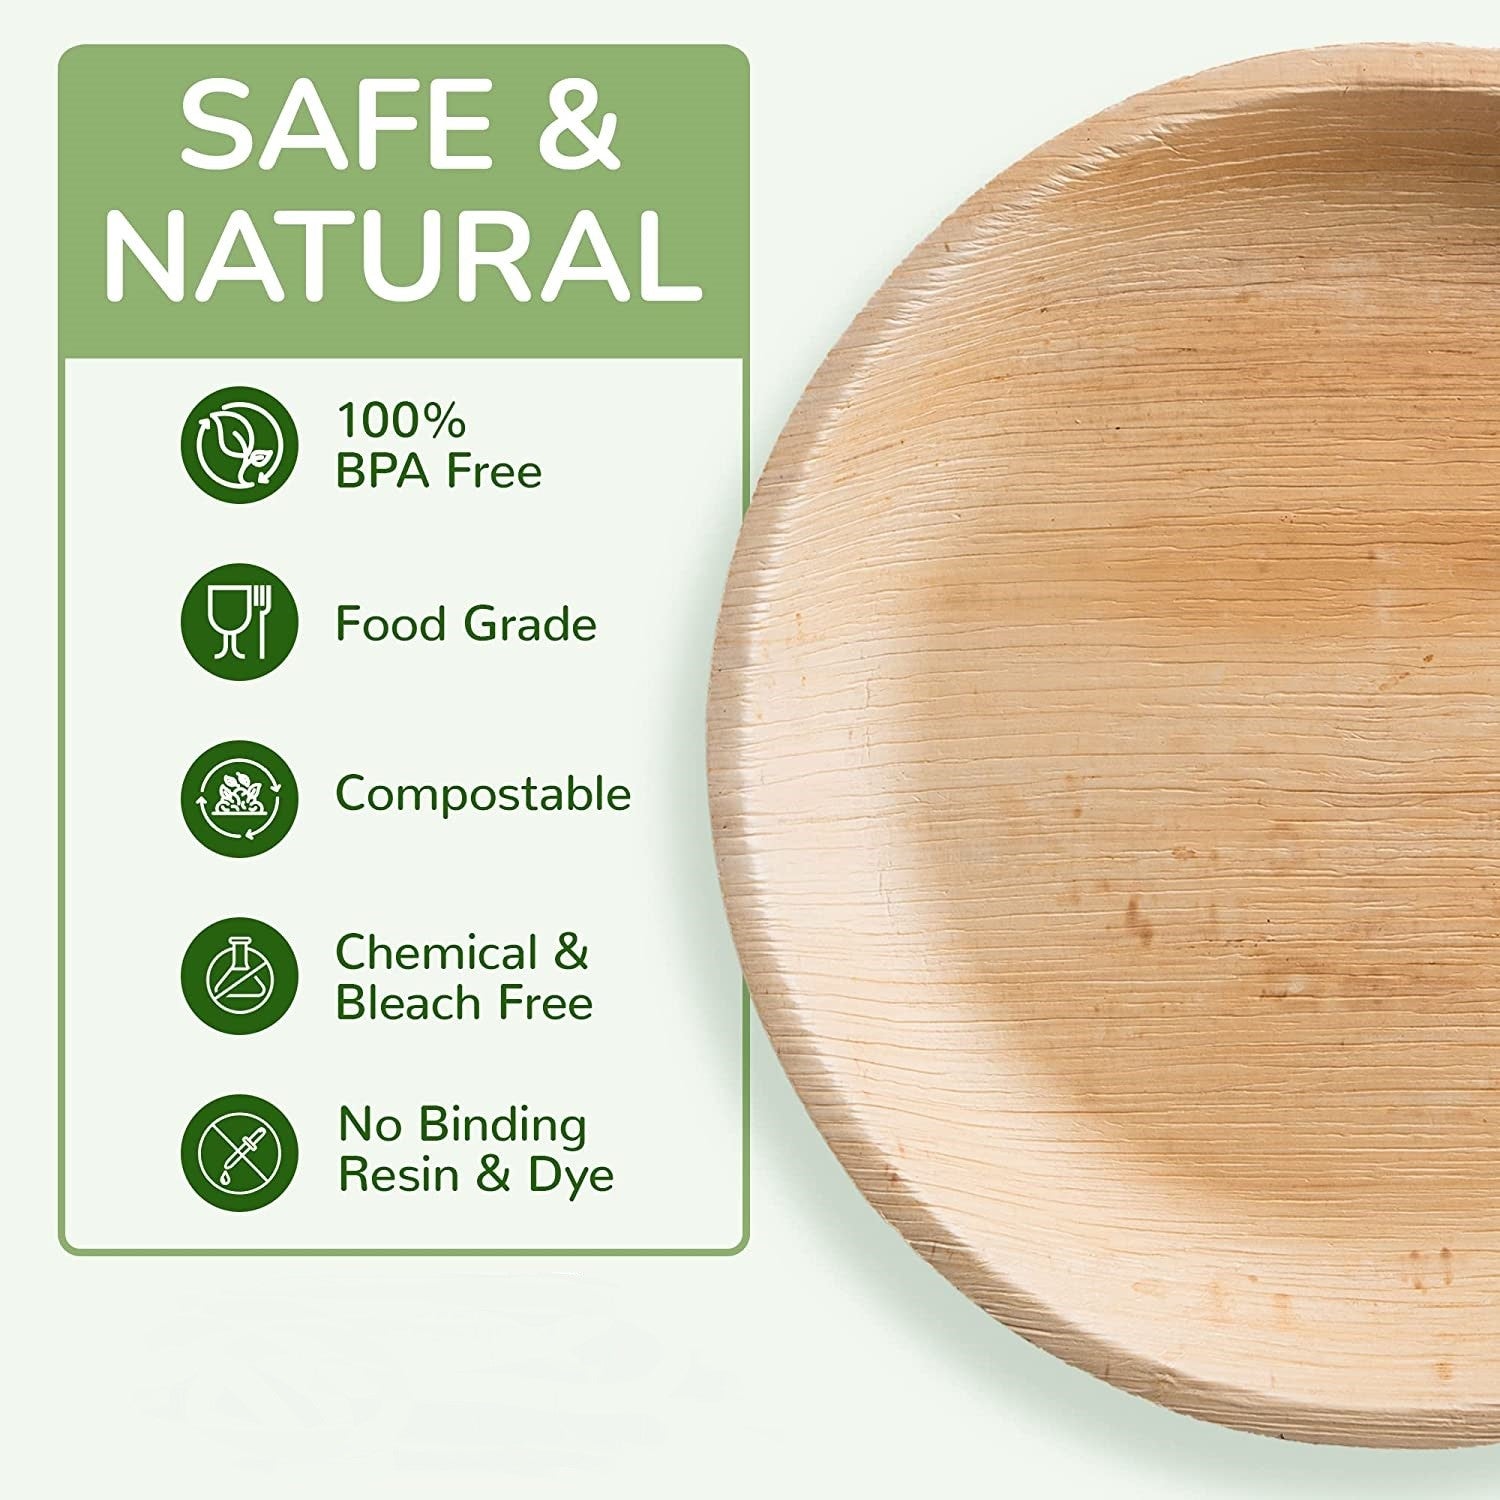 Eco Leaf Products - Disposable Palm Leaf Bamboo Plates & Tableware